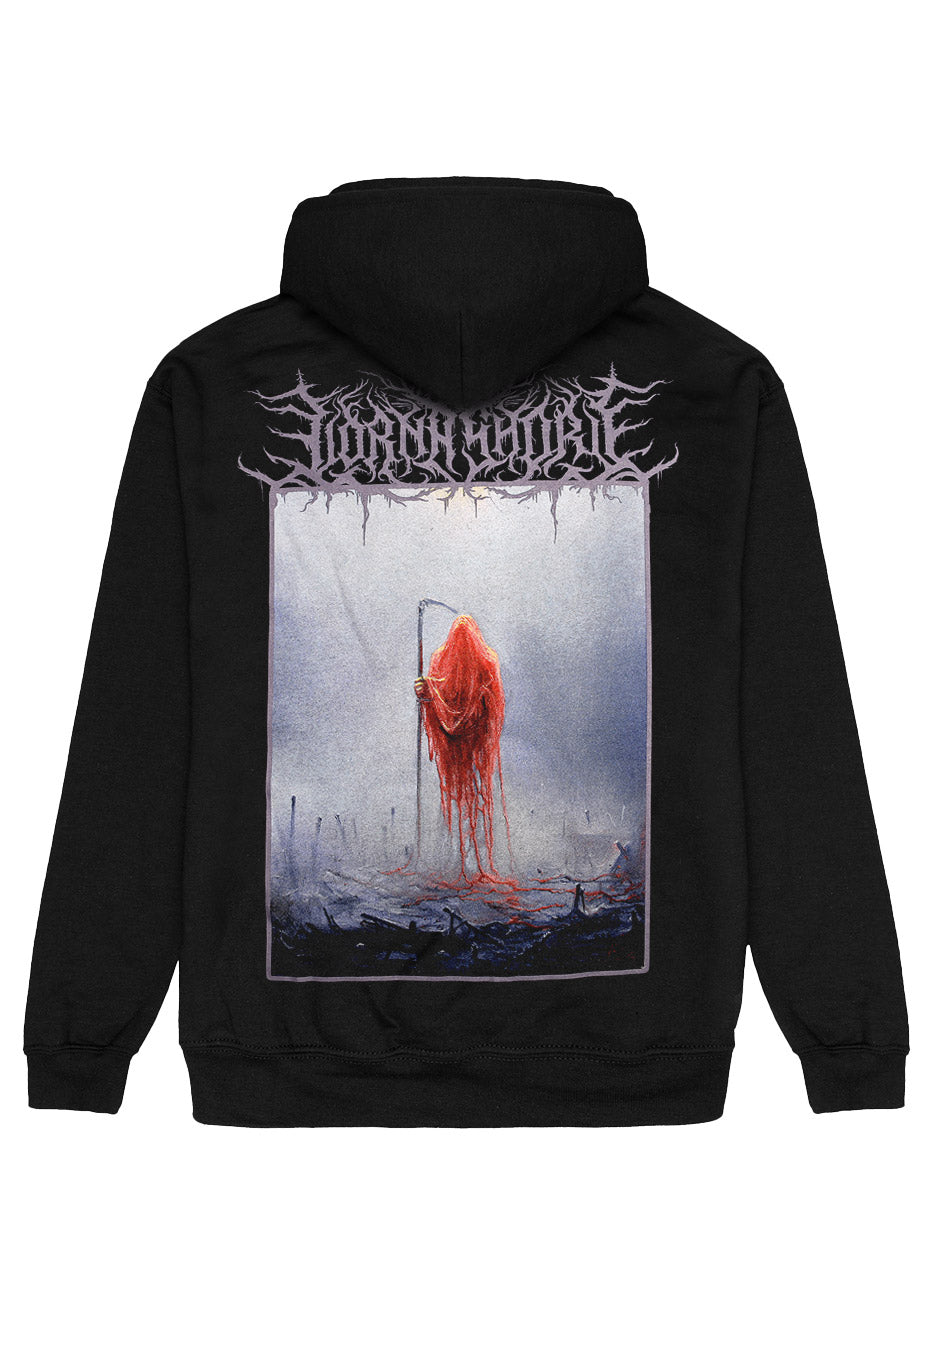 Lorna Shore - And I Return To Nothingness Cover - Zipper | Neutral-Image